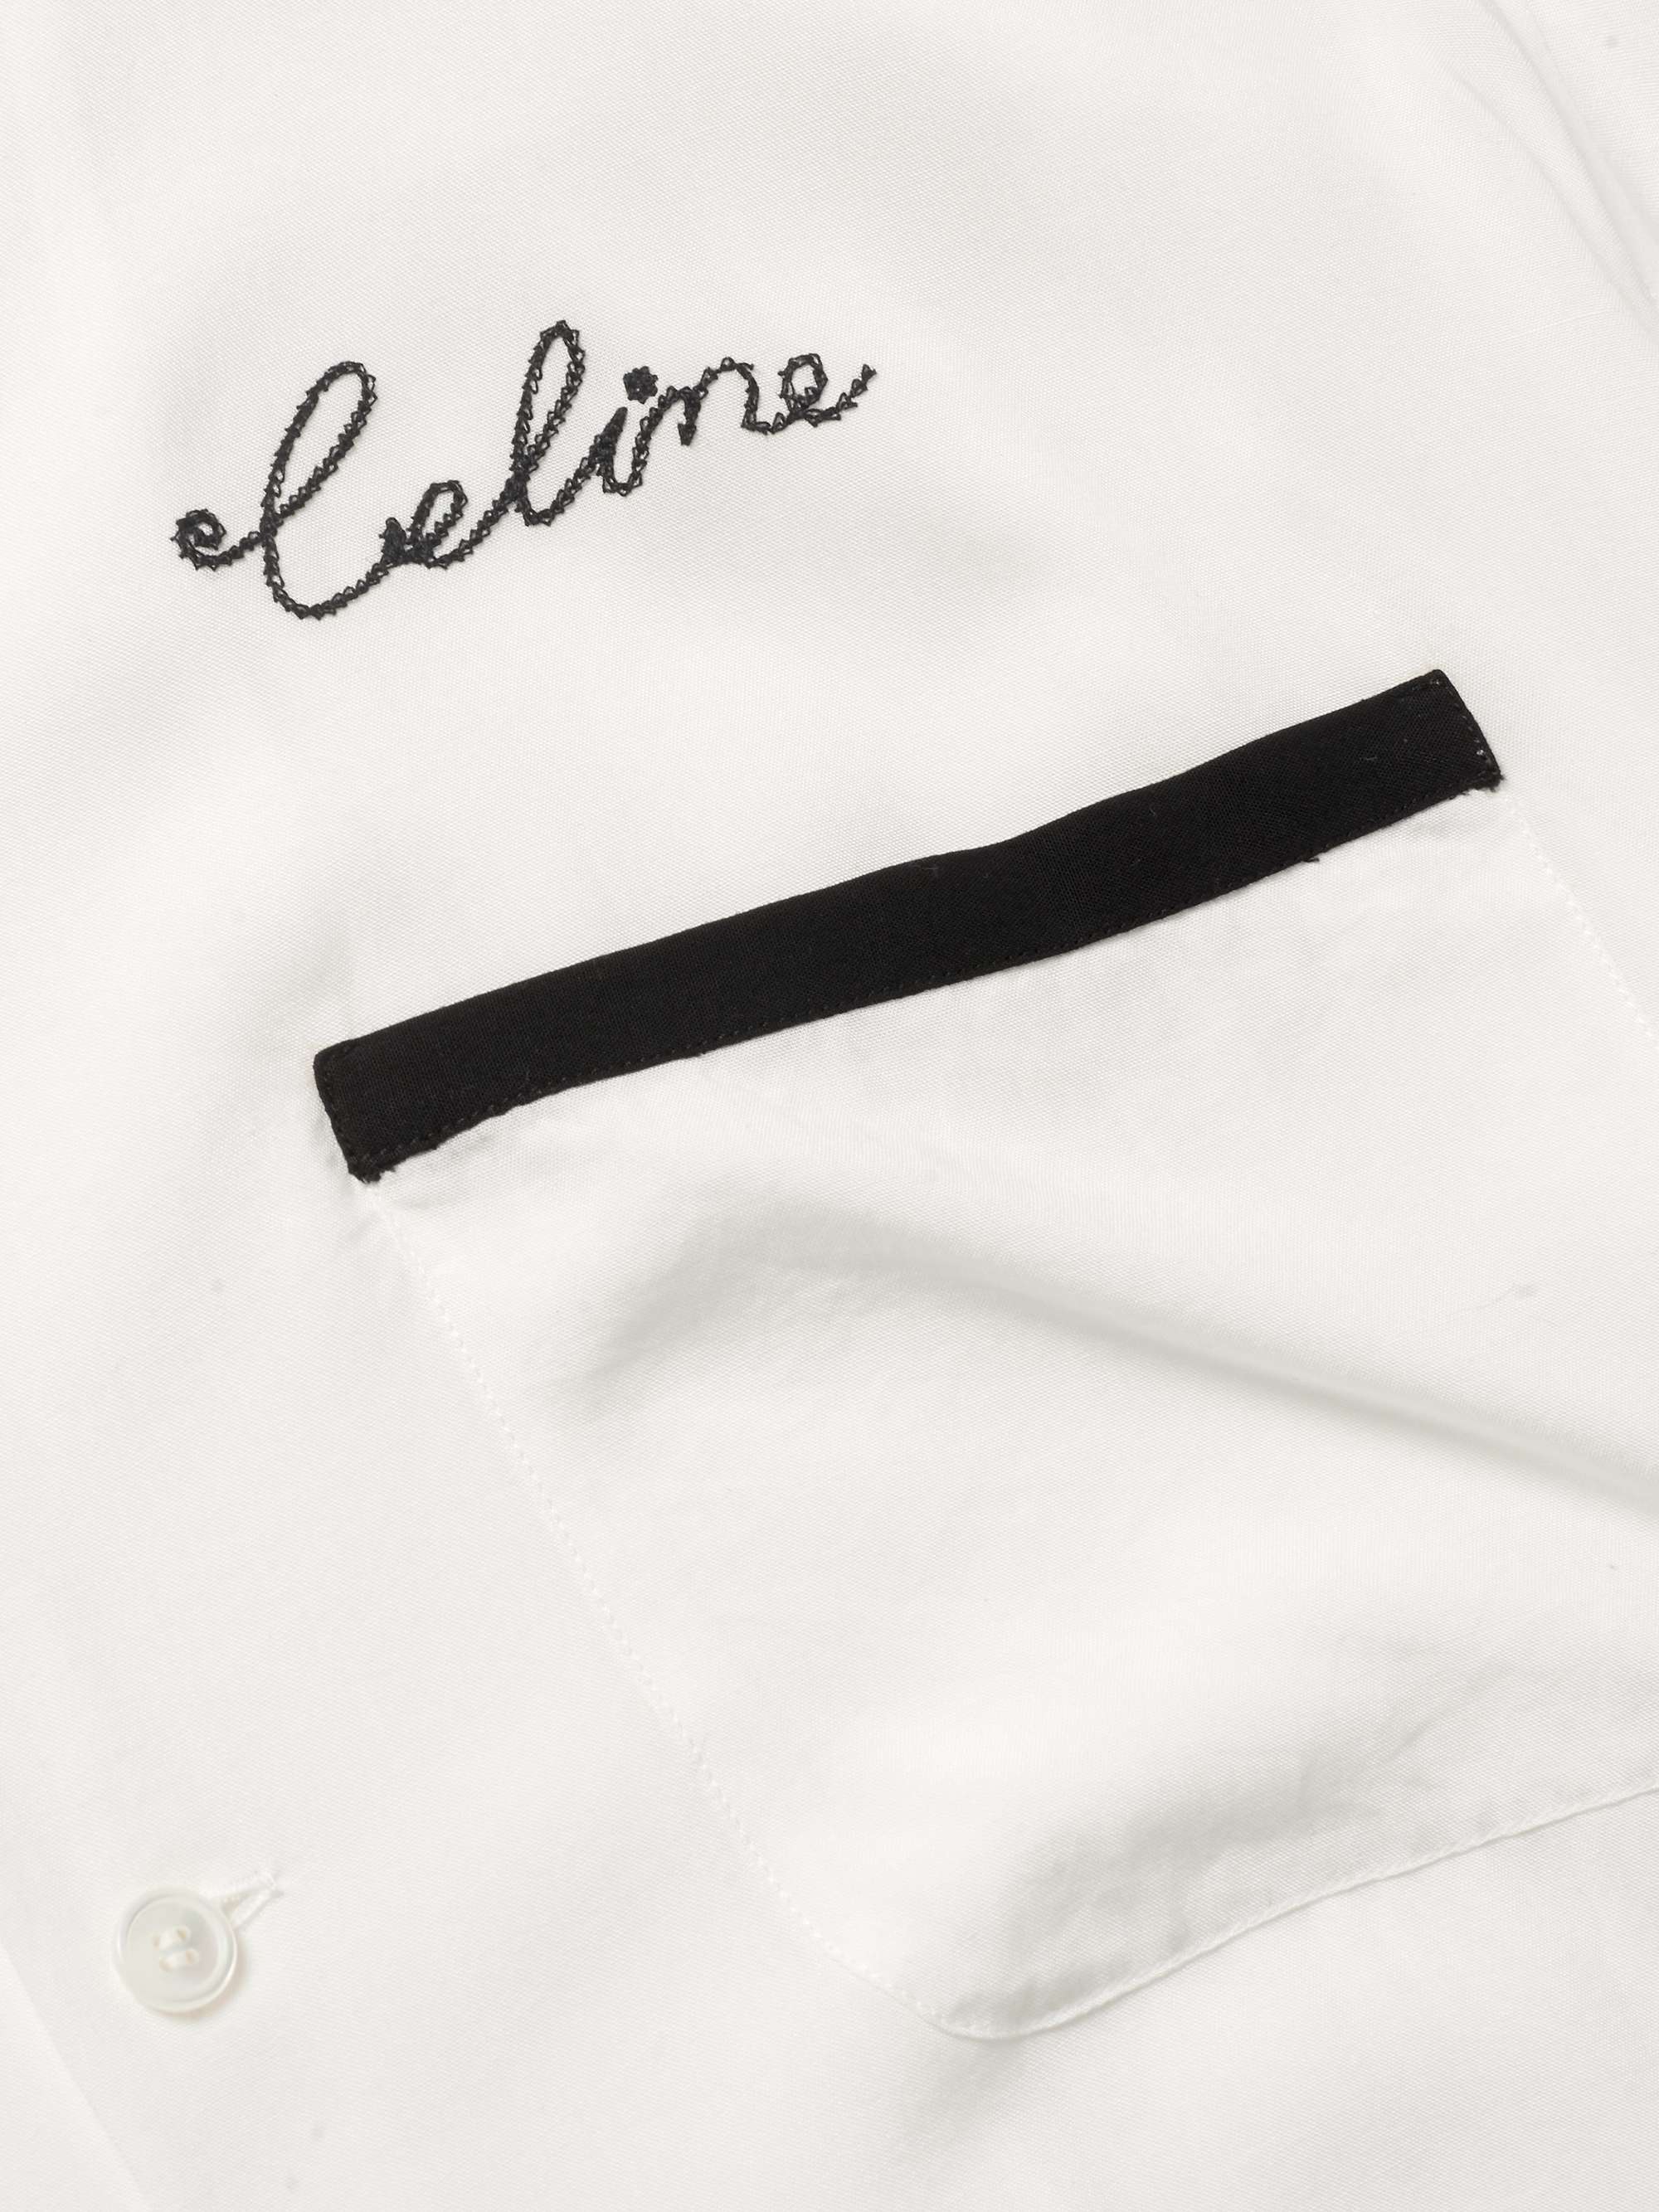 CELINE HOMME Camp-Collar Printed Voile Shirt